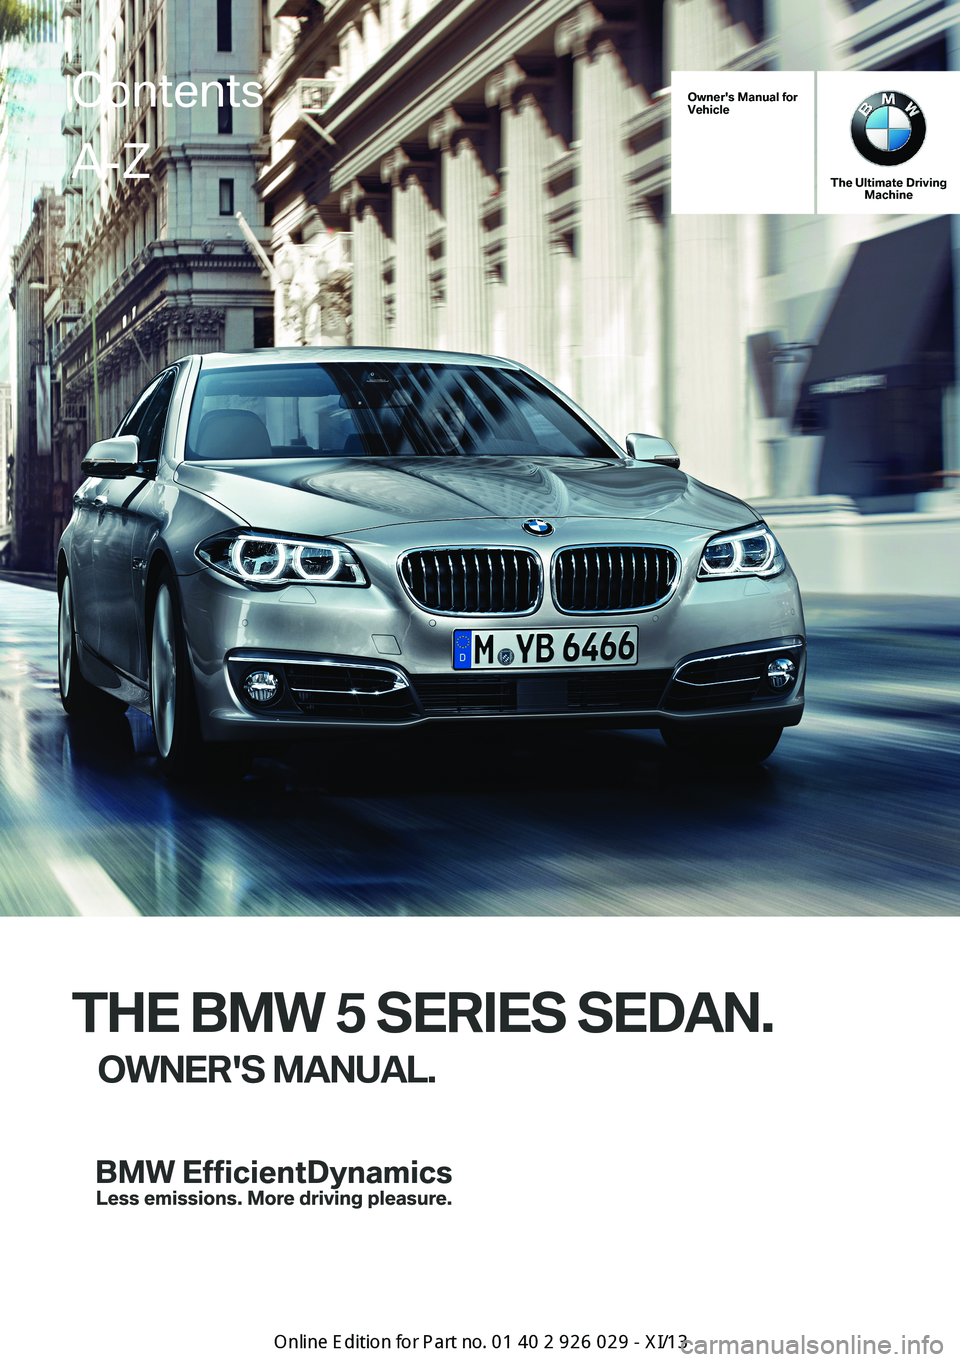 BMW 528I XDRIVE SEDAN 2013  Owners Manual Owner's Manual forVehicle
The Ultimate DrivingMachine
THE BMW 5 SERIES SEDAN.
OWNER'S MANUAL.ContentsA-Z
Online Edition for Part no. 01 40 2 911 177 - VI/13   